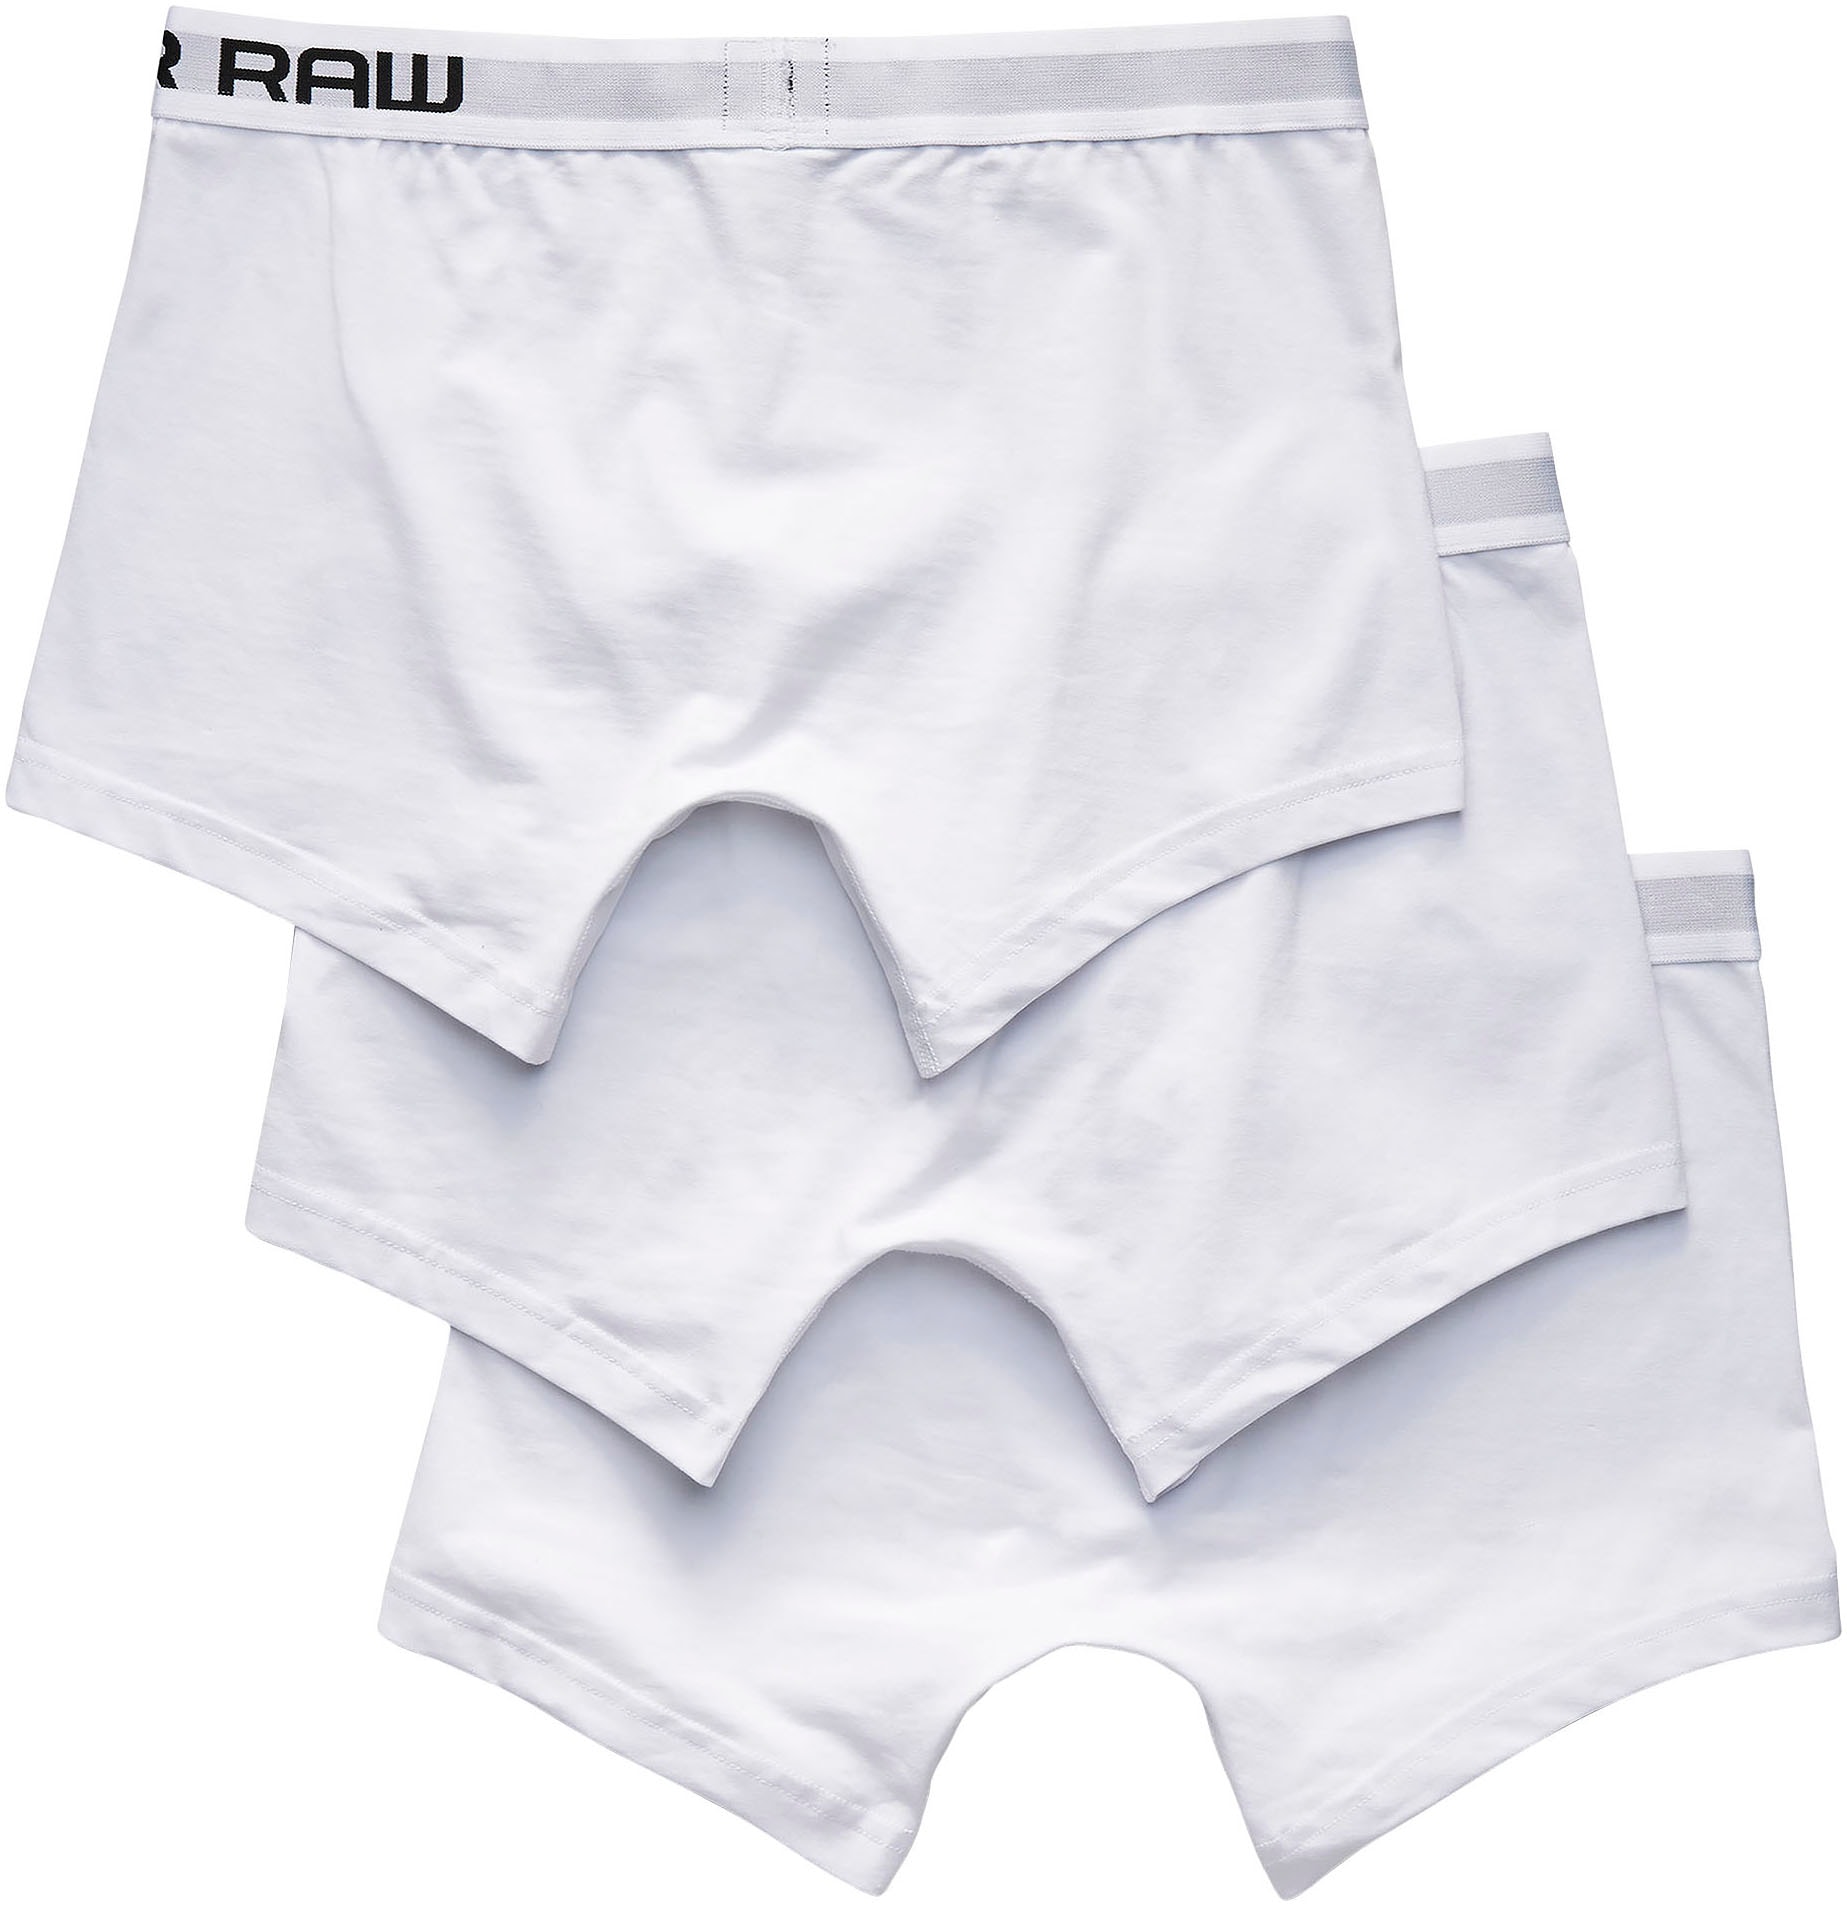 G-Star RAW Boxershorts »Classic trunk 3 pack«, (3 St., 3er-Pack)